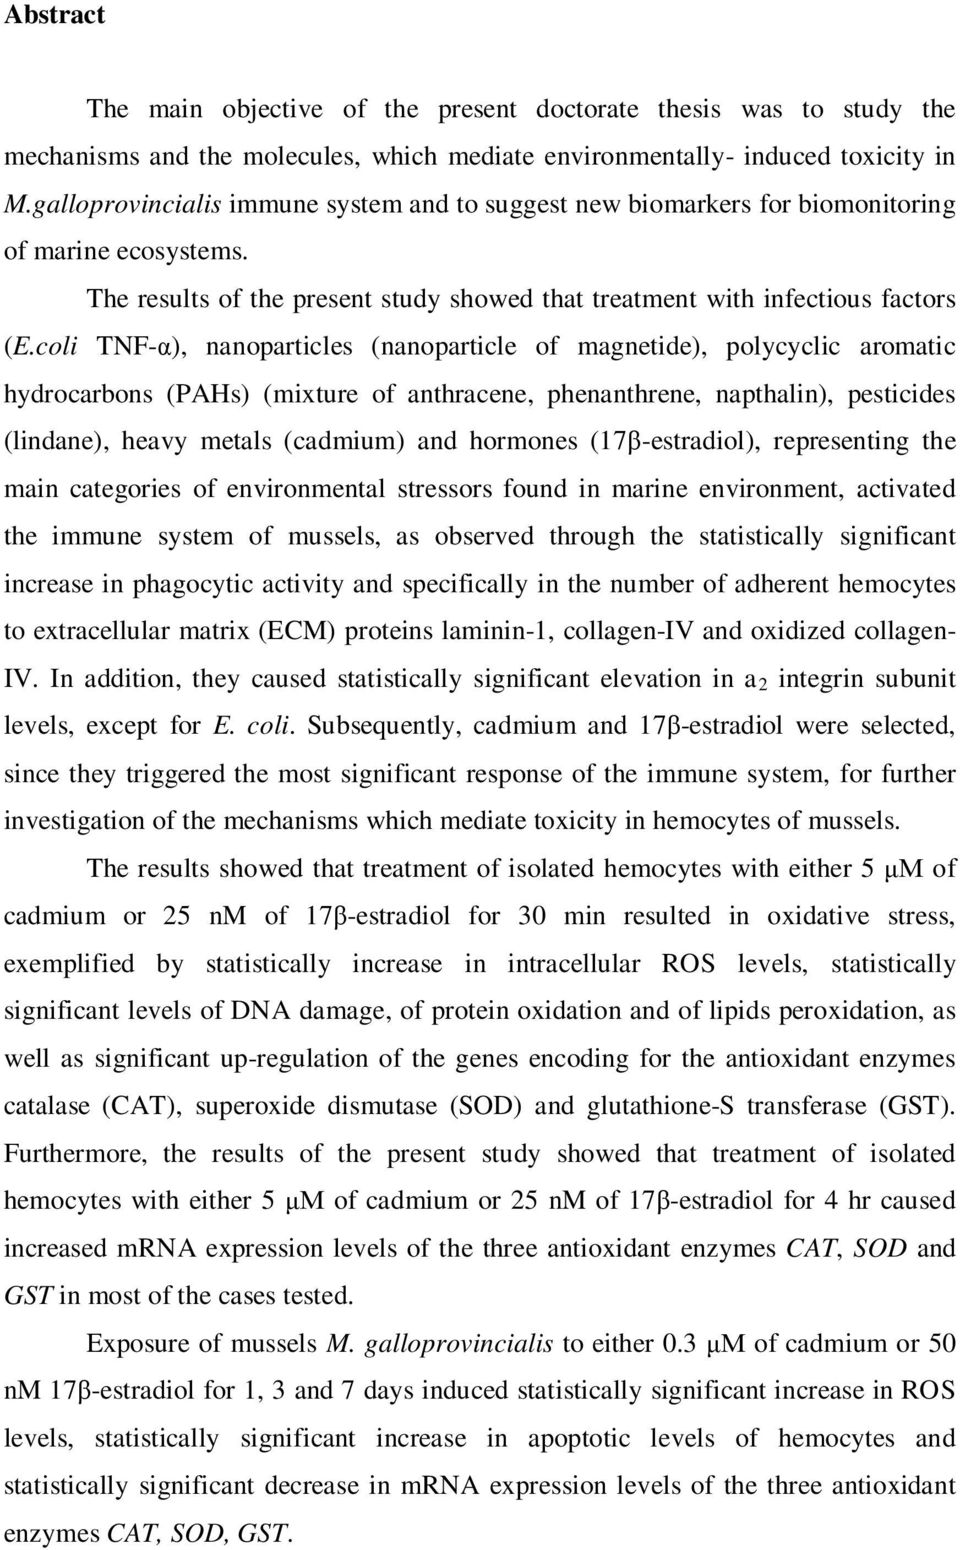 coli TNF-α), nanoparticles (nanoparticle of magnetide), polycyclic aromatic hydrocarbons (PAHs) (mixture of anthracene, phenanthrene, napthalin), pesticides (lindane), heavy metals (cadmium) and